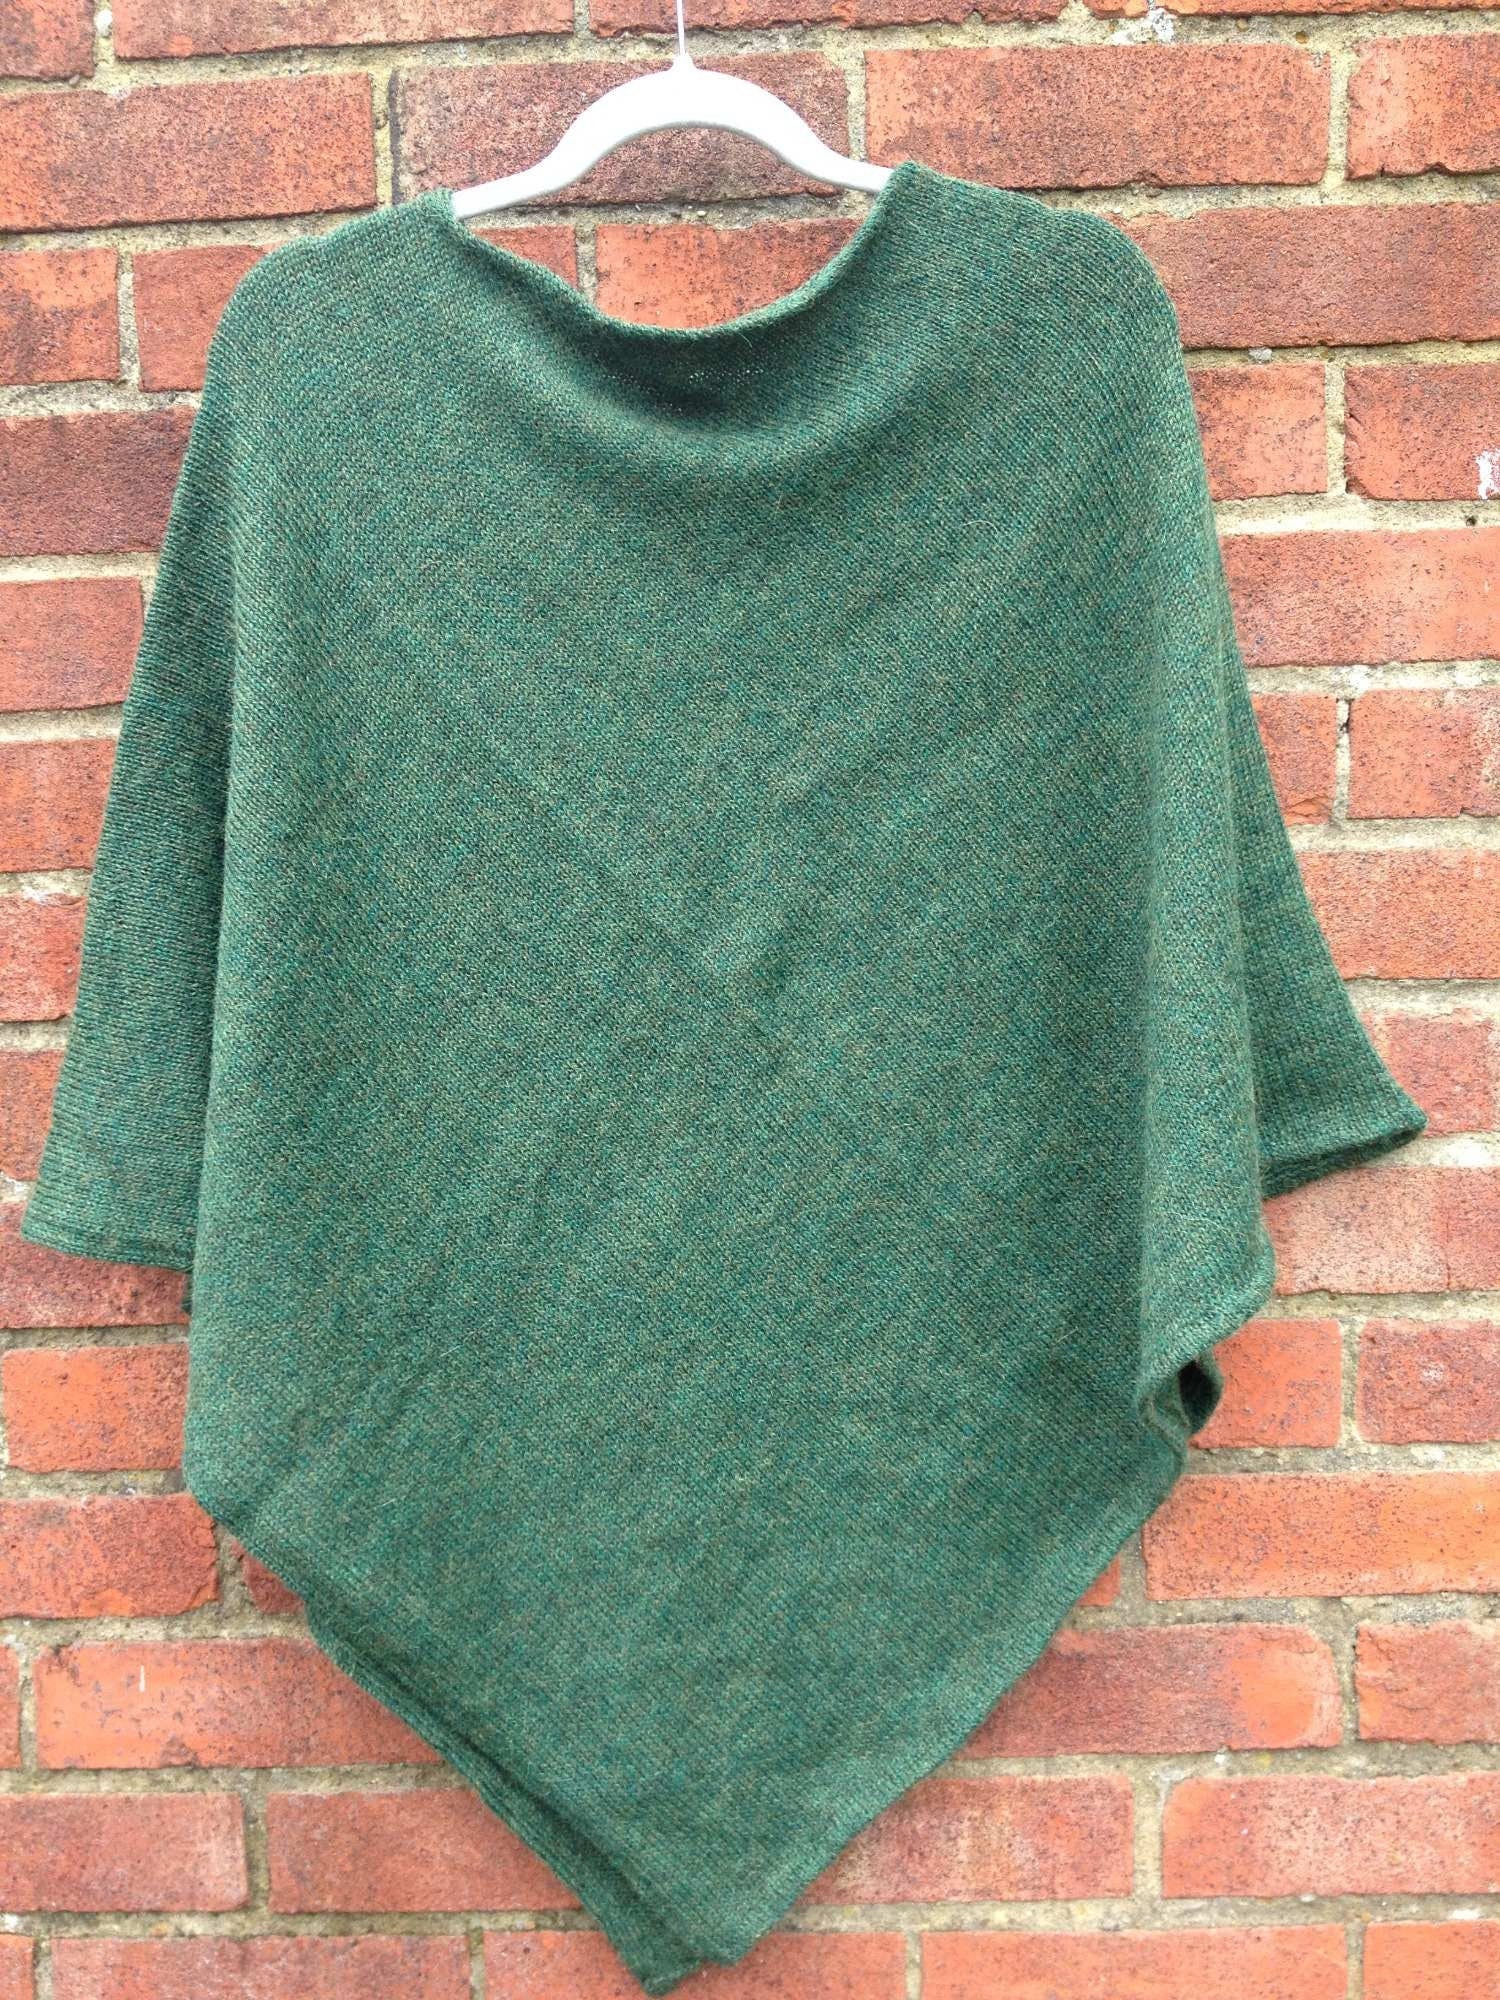 Alpaca Wool Poncho Women, Knitted, Warm knit ladies wrap, Beige, Oatmeal, Natural fibres, Ethical, eco friendly, fair trade, plastic free